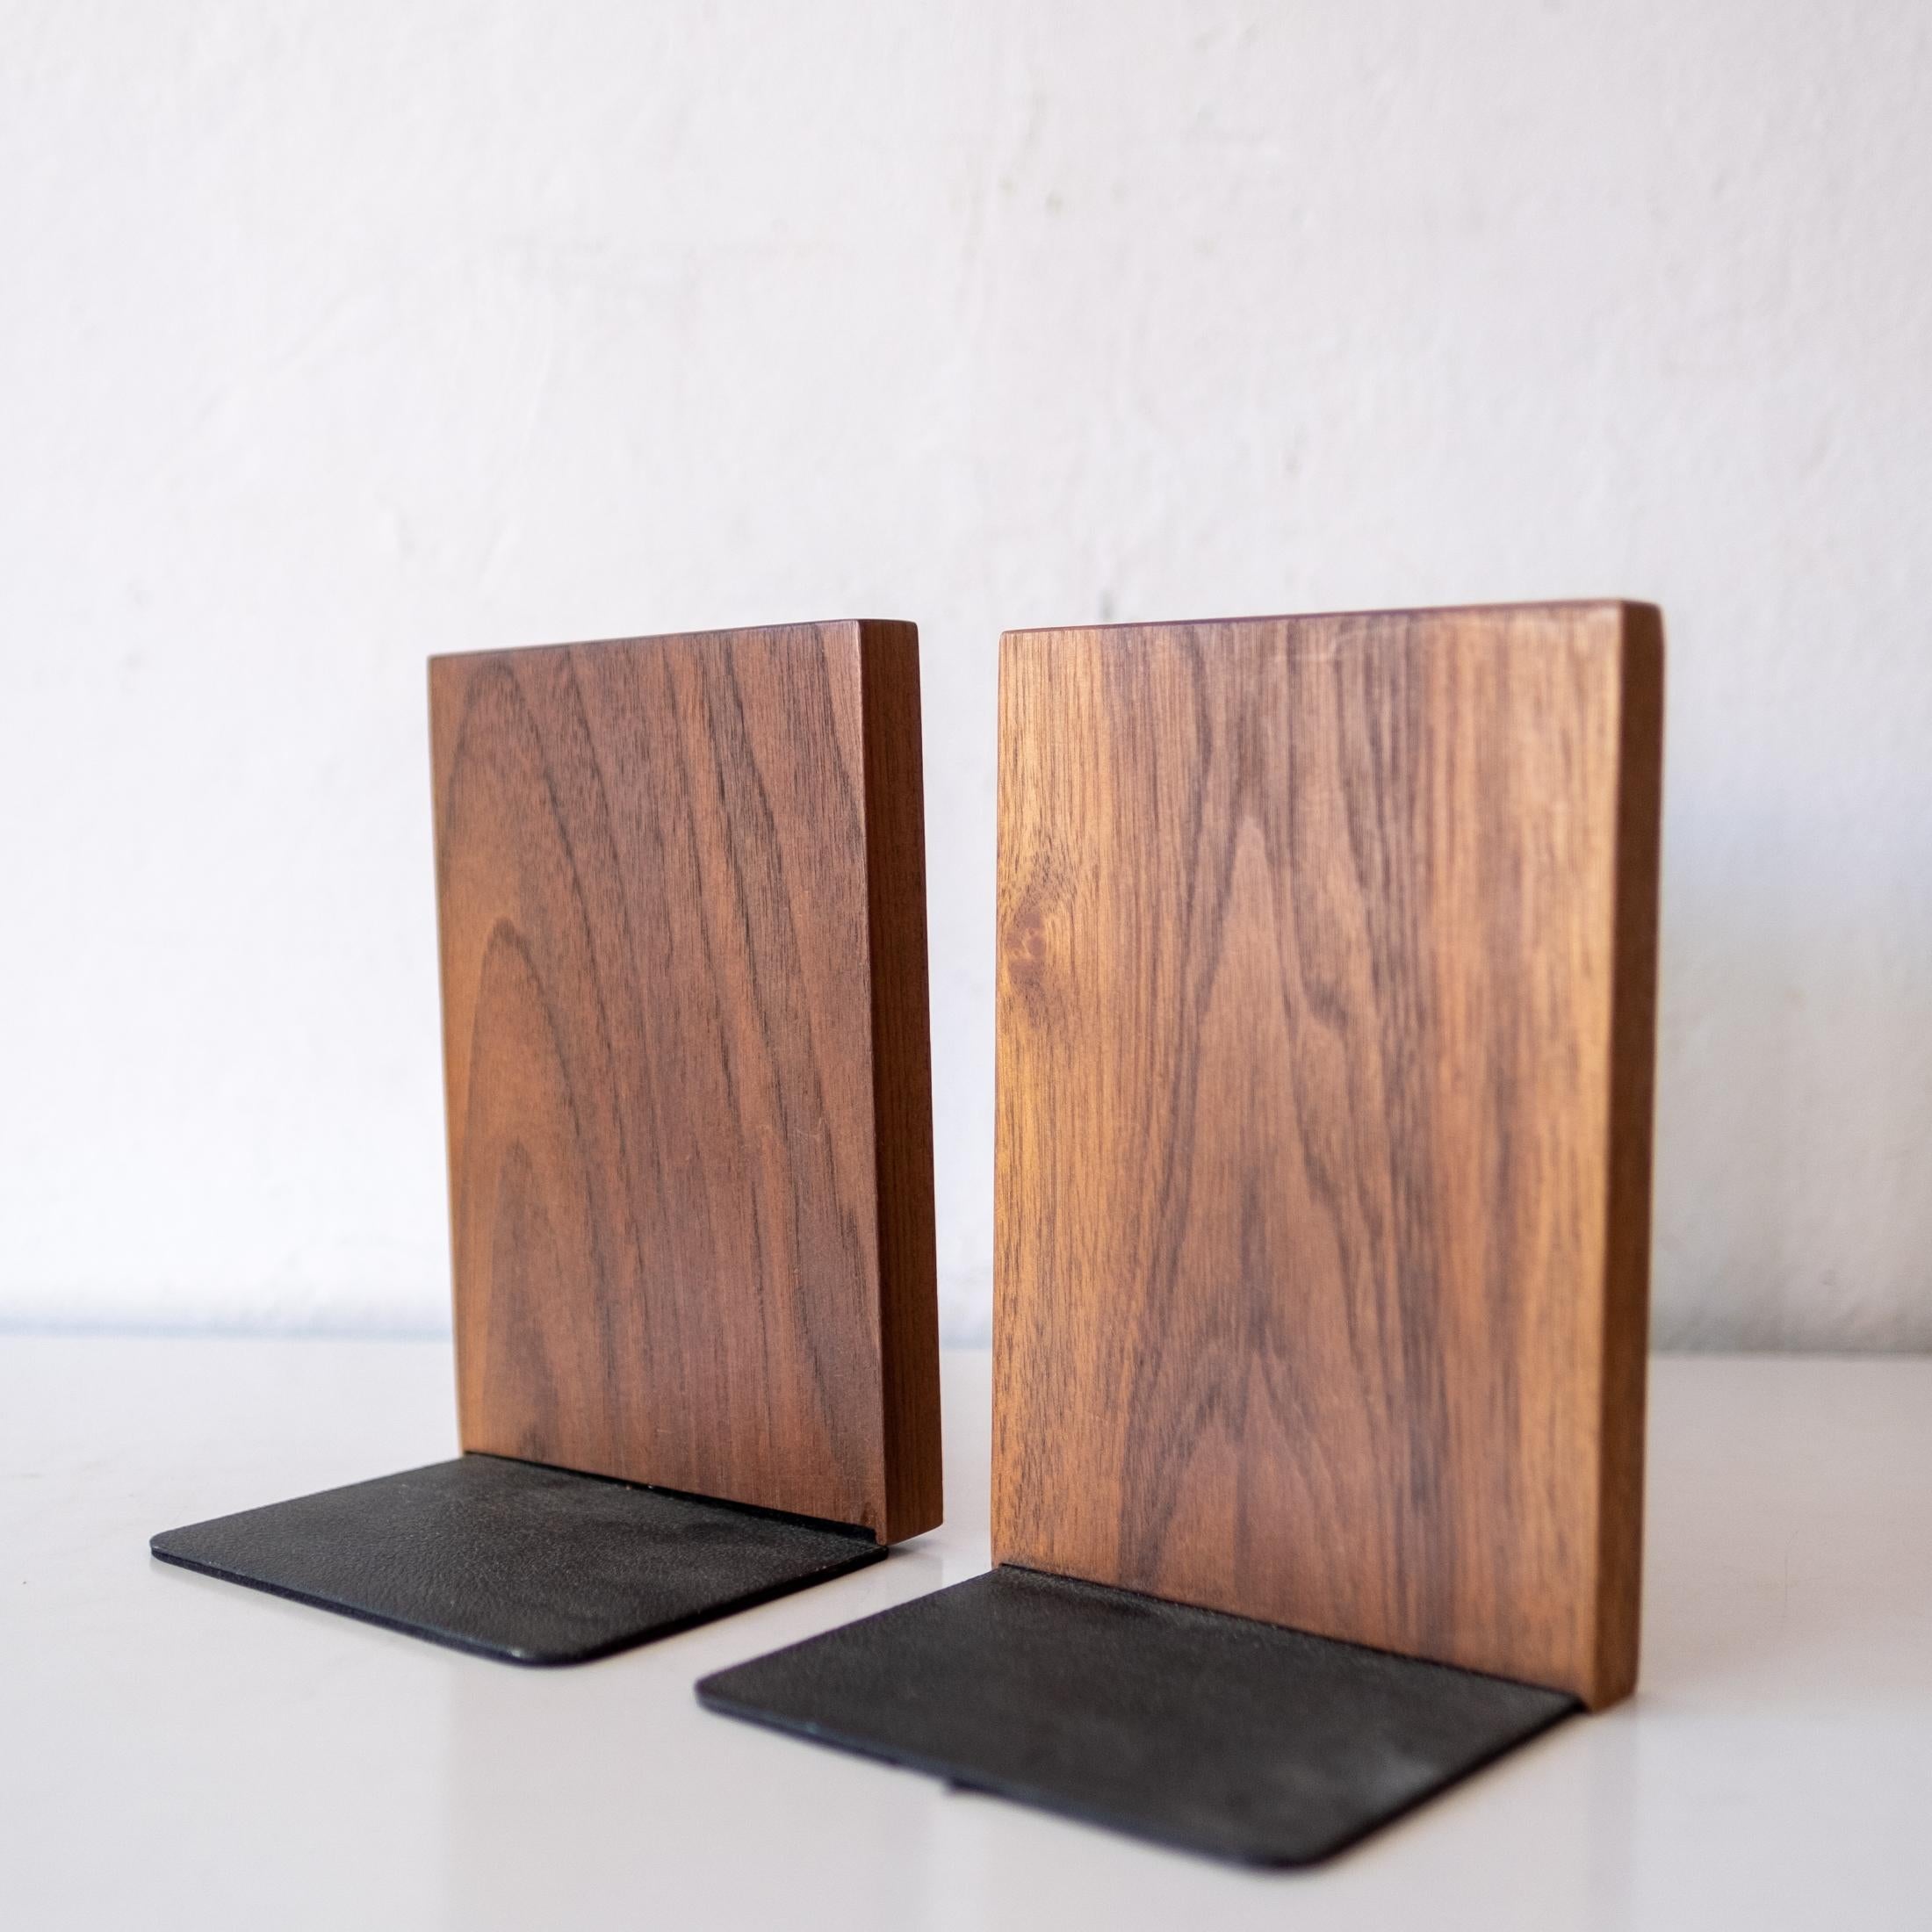 Midcentury Walnut and Ceramic Tile and Bookends In Good Condition For Sale In San Diego, CA